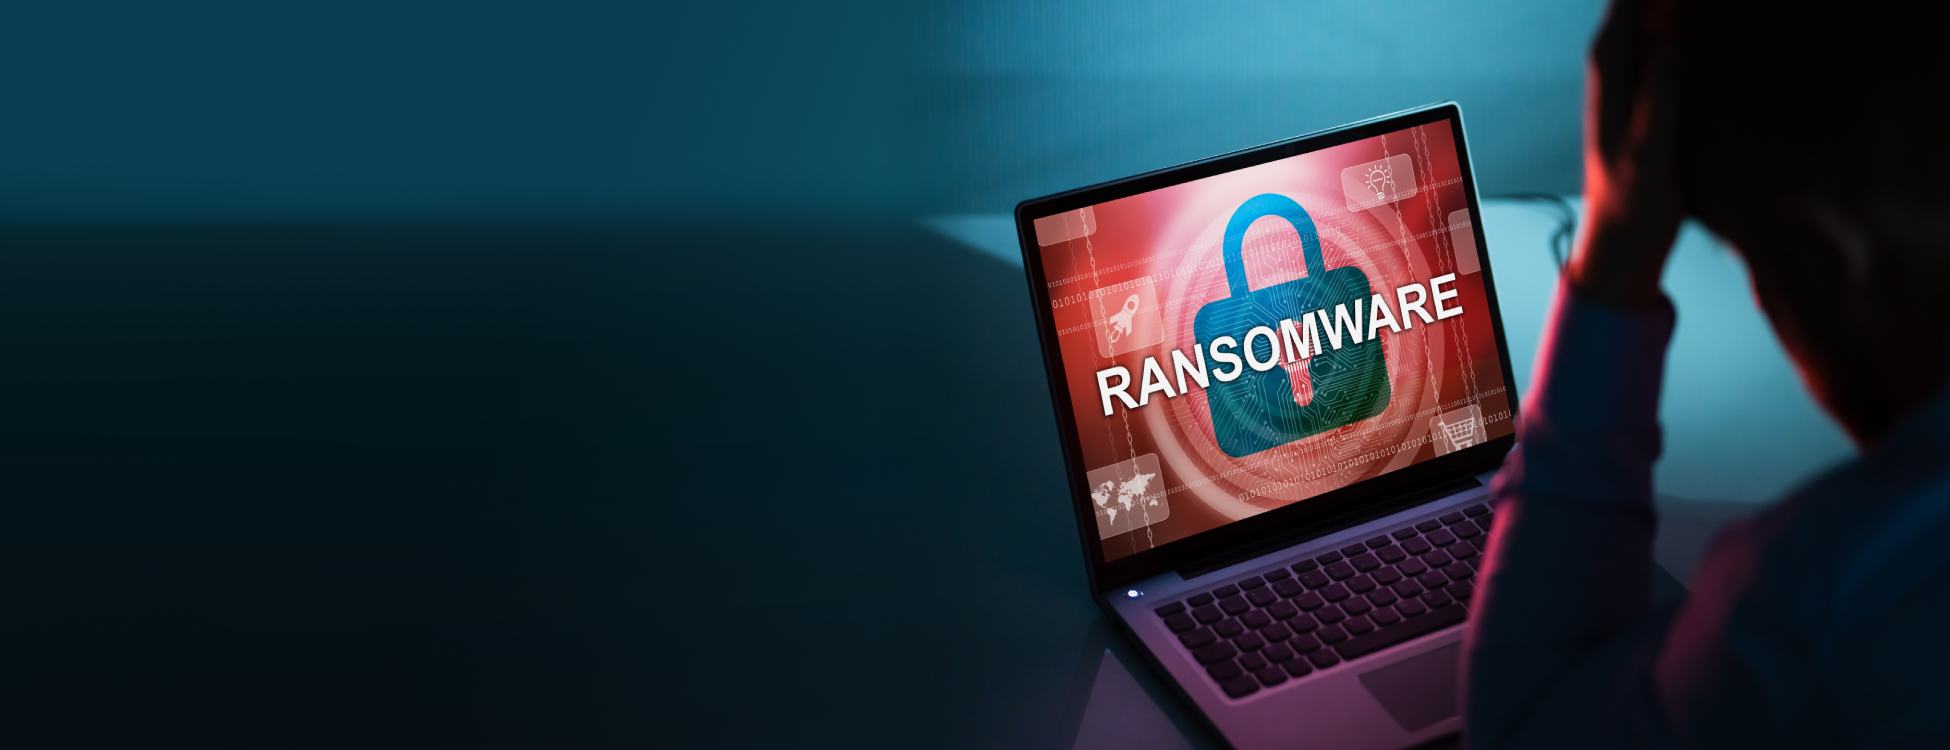 Laptop with ransomware